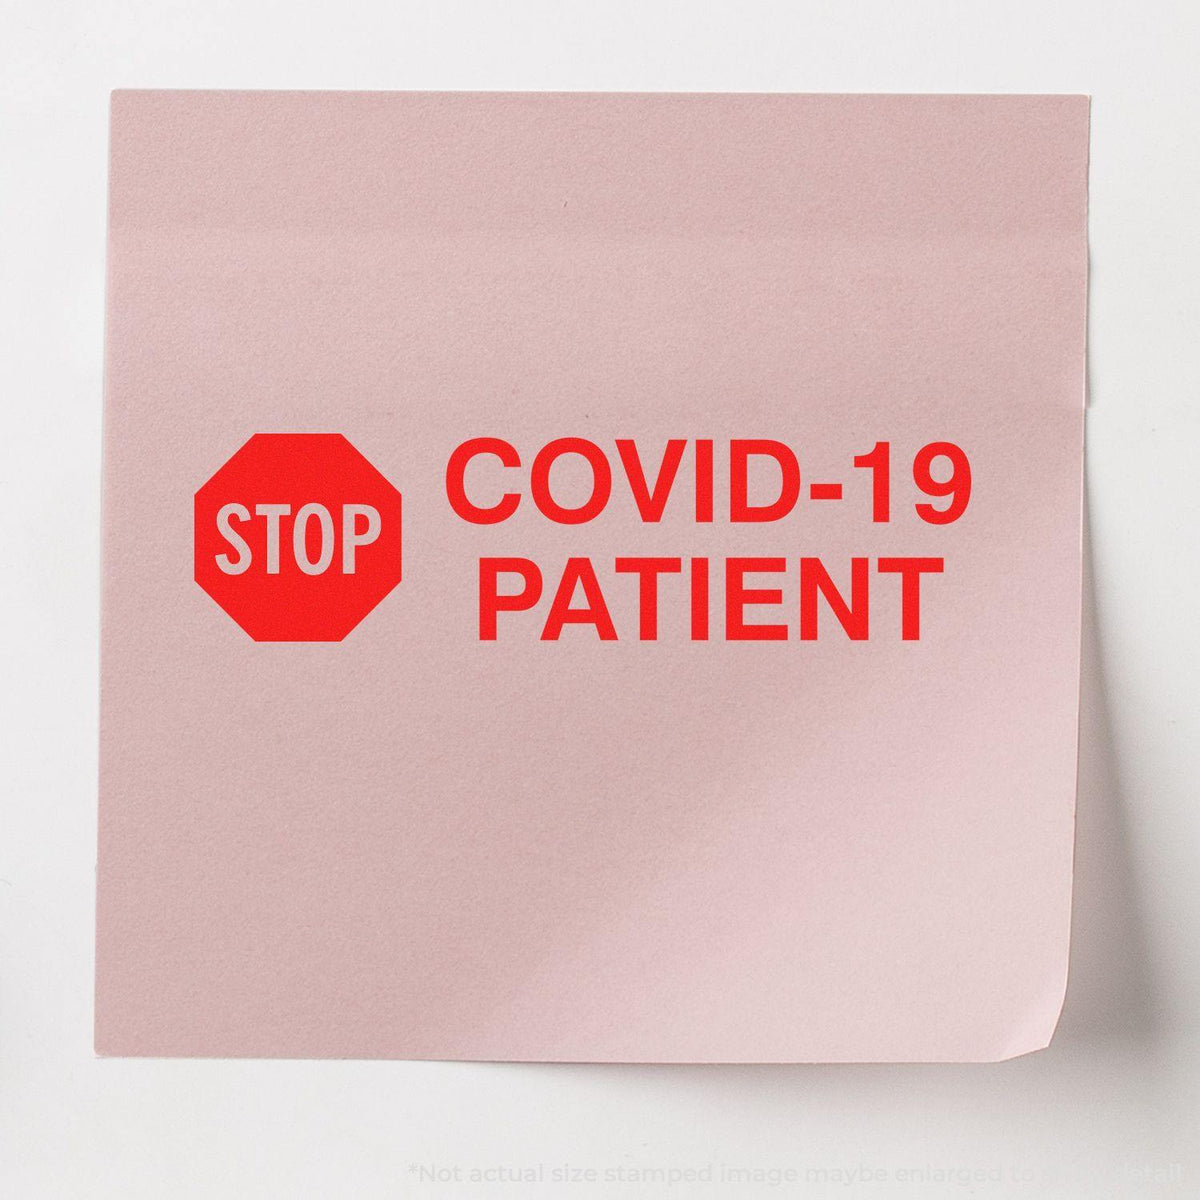 Stop Covid Patient Rubber Stamp Lifestyle Photo